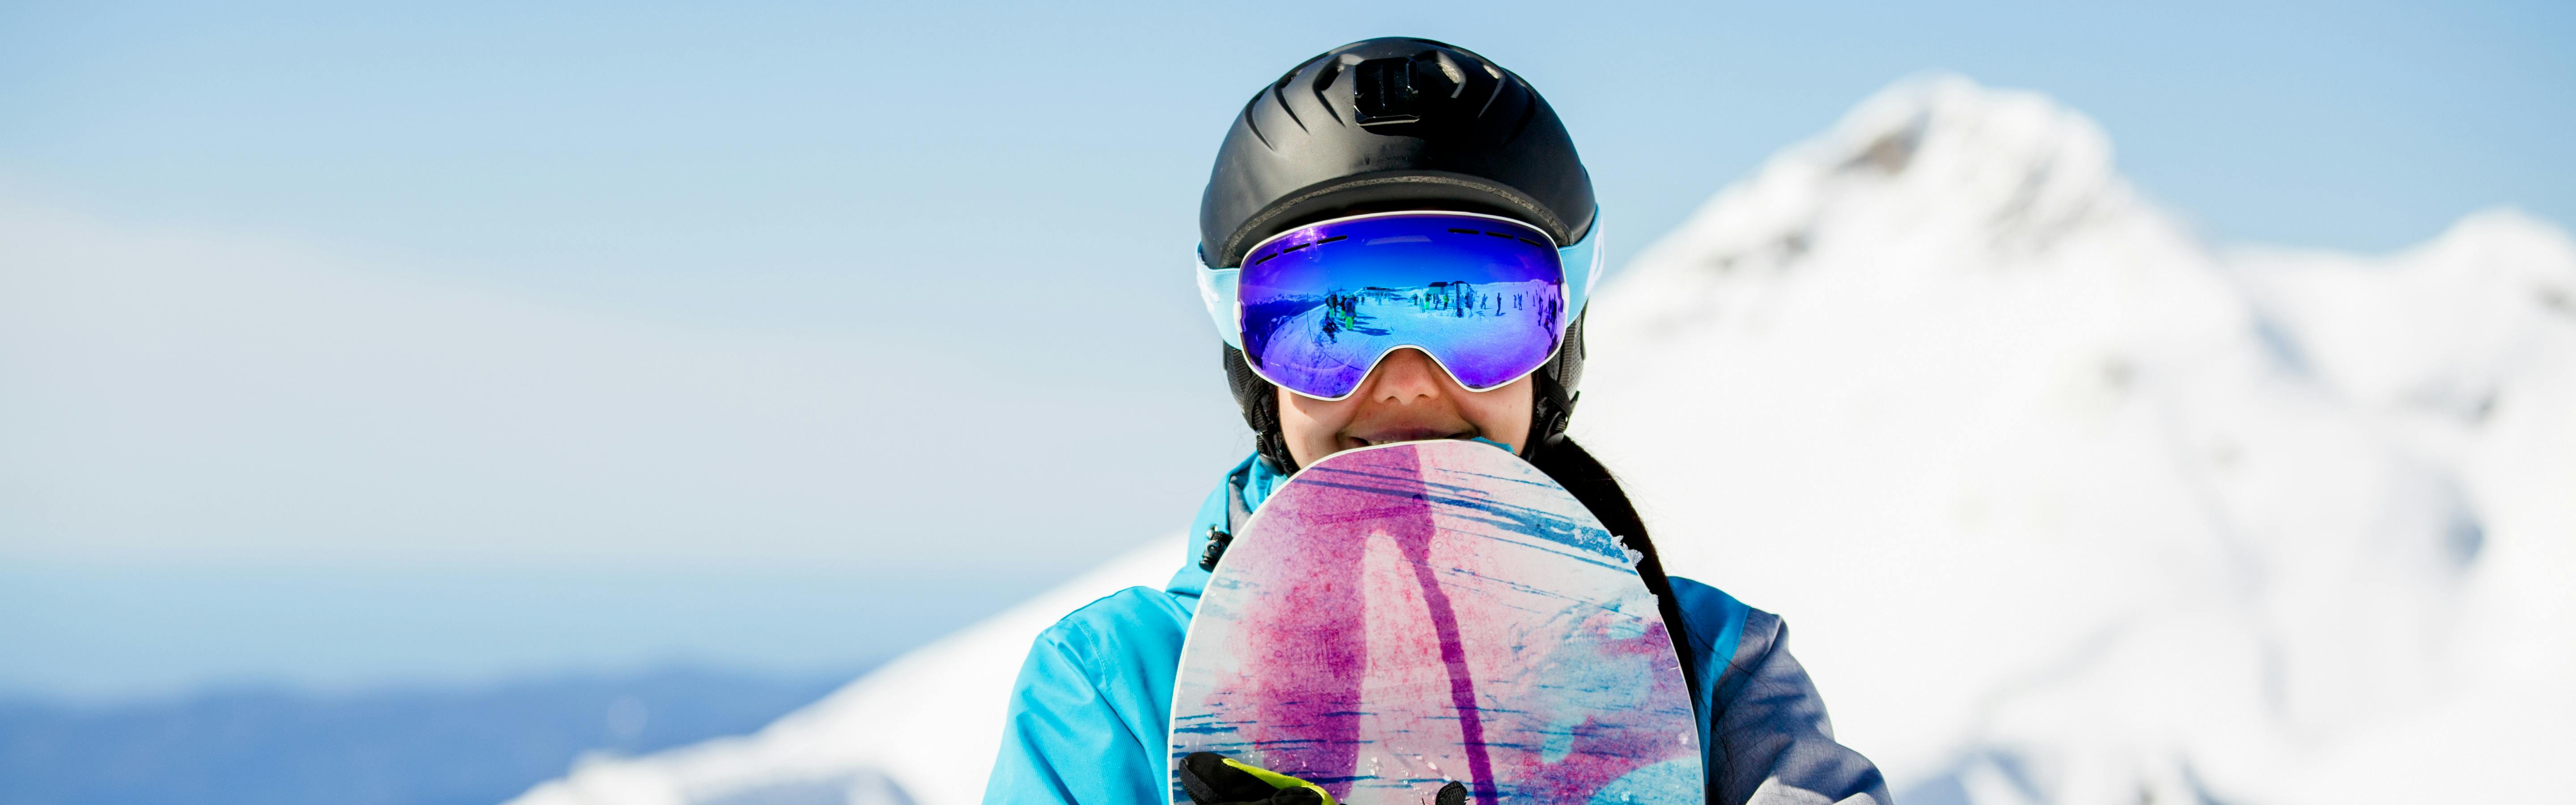 A snowboarder holding her board as she looks at the camera. She is wearing goggles and a helmet. 